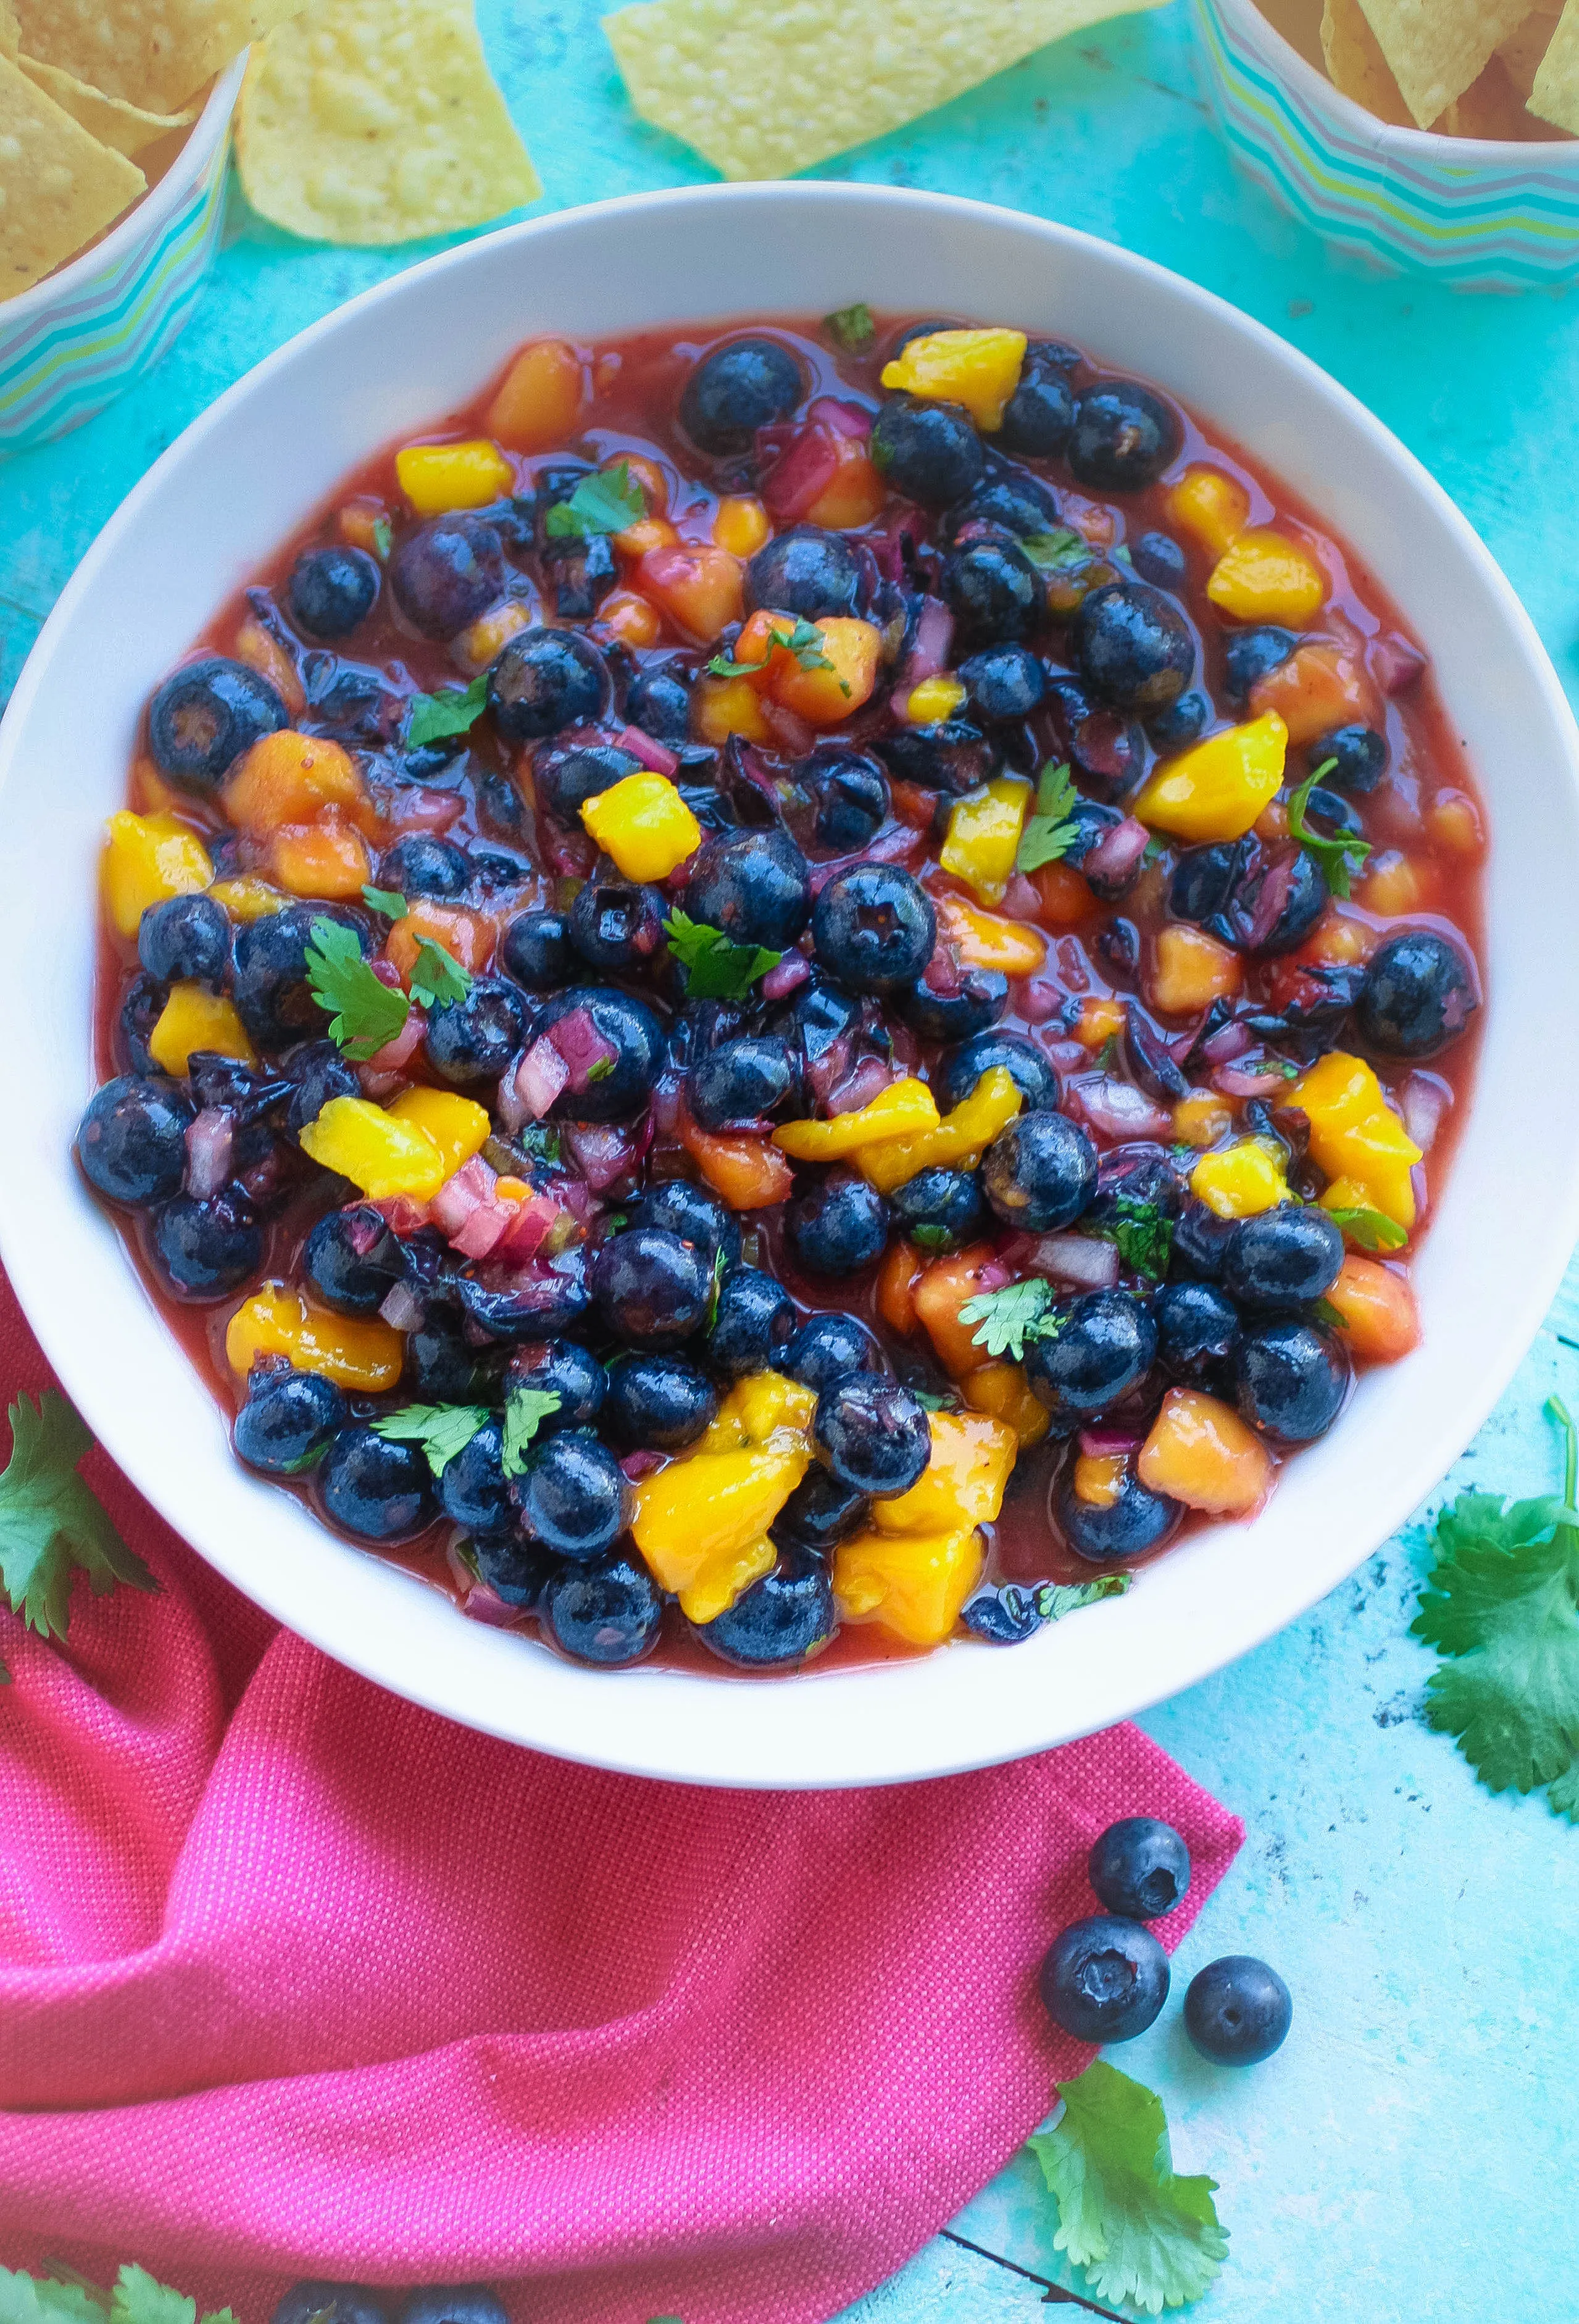 Blueberry-Mango Salsa is something delightfully different to snack on! Blueberry-Mango Salsa should be your new go-to salsa this season!